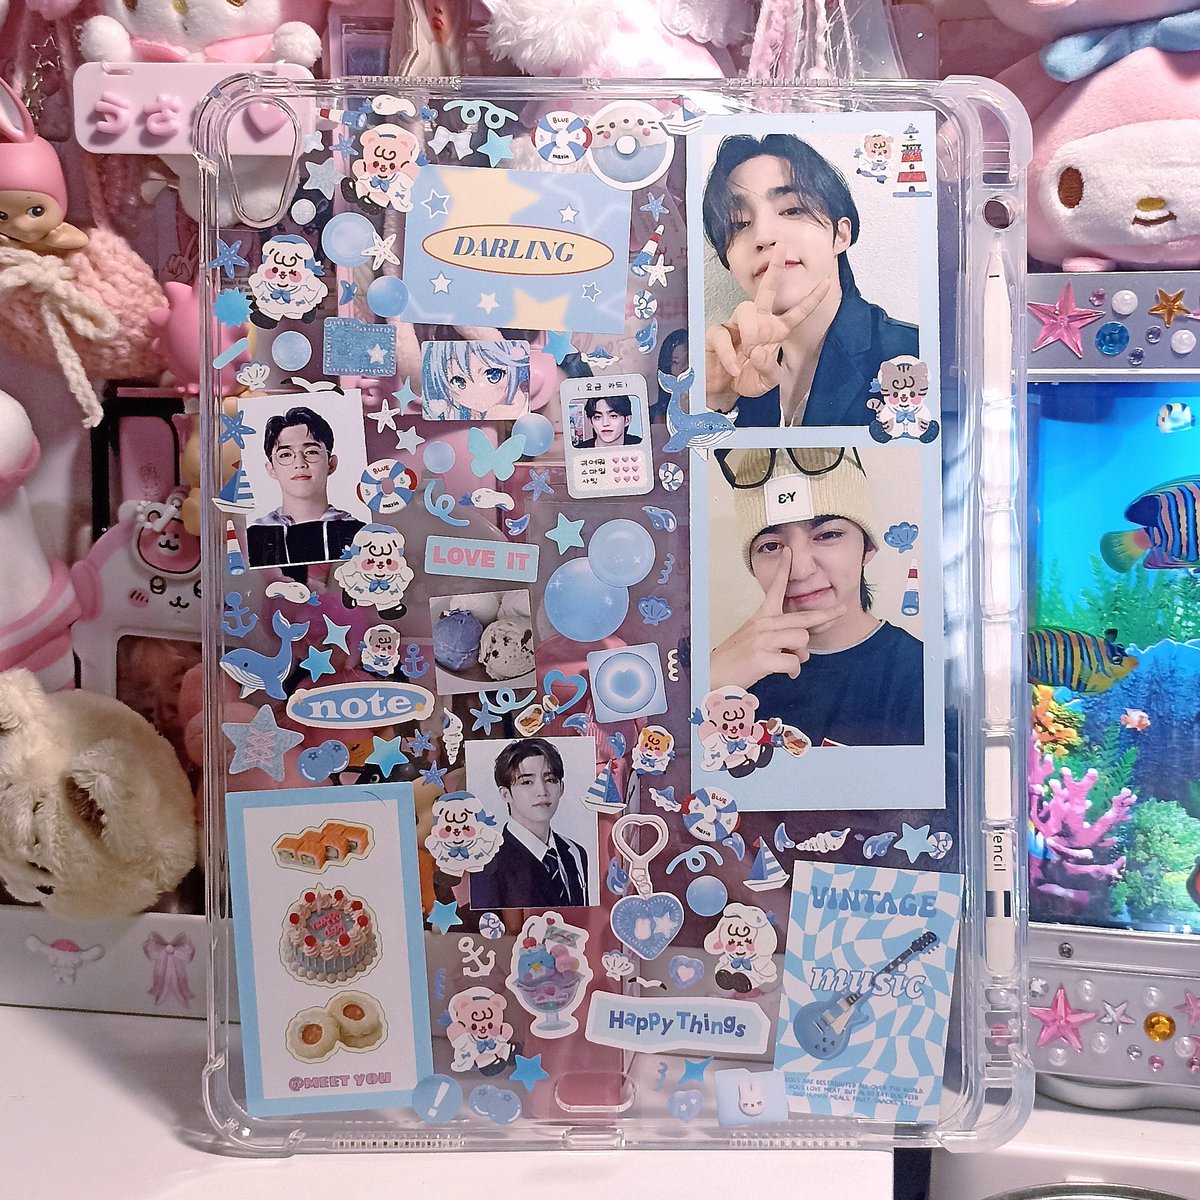 ✭open po clear case custom by @lhyeinthings ✭
📞read tnc before ordering
📞po start 12 mei - close isi gform
📞price and detail di bawah
📞macbook/huawei laptop
📞andorid and iphone/ipad and tab
✭help rt thankyou!<3✭